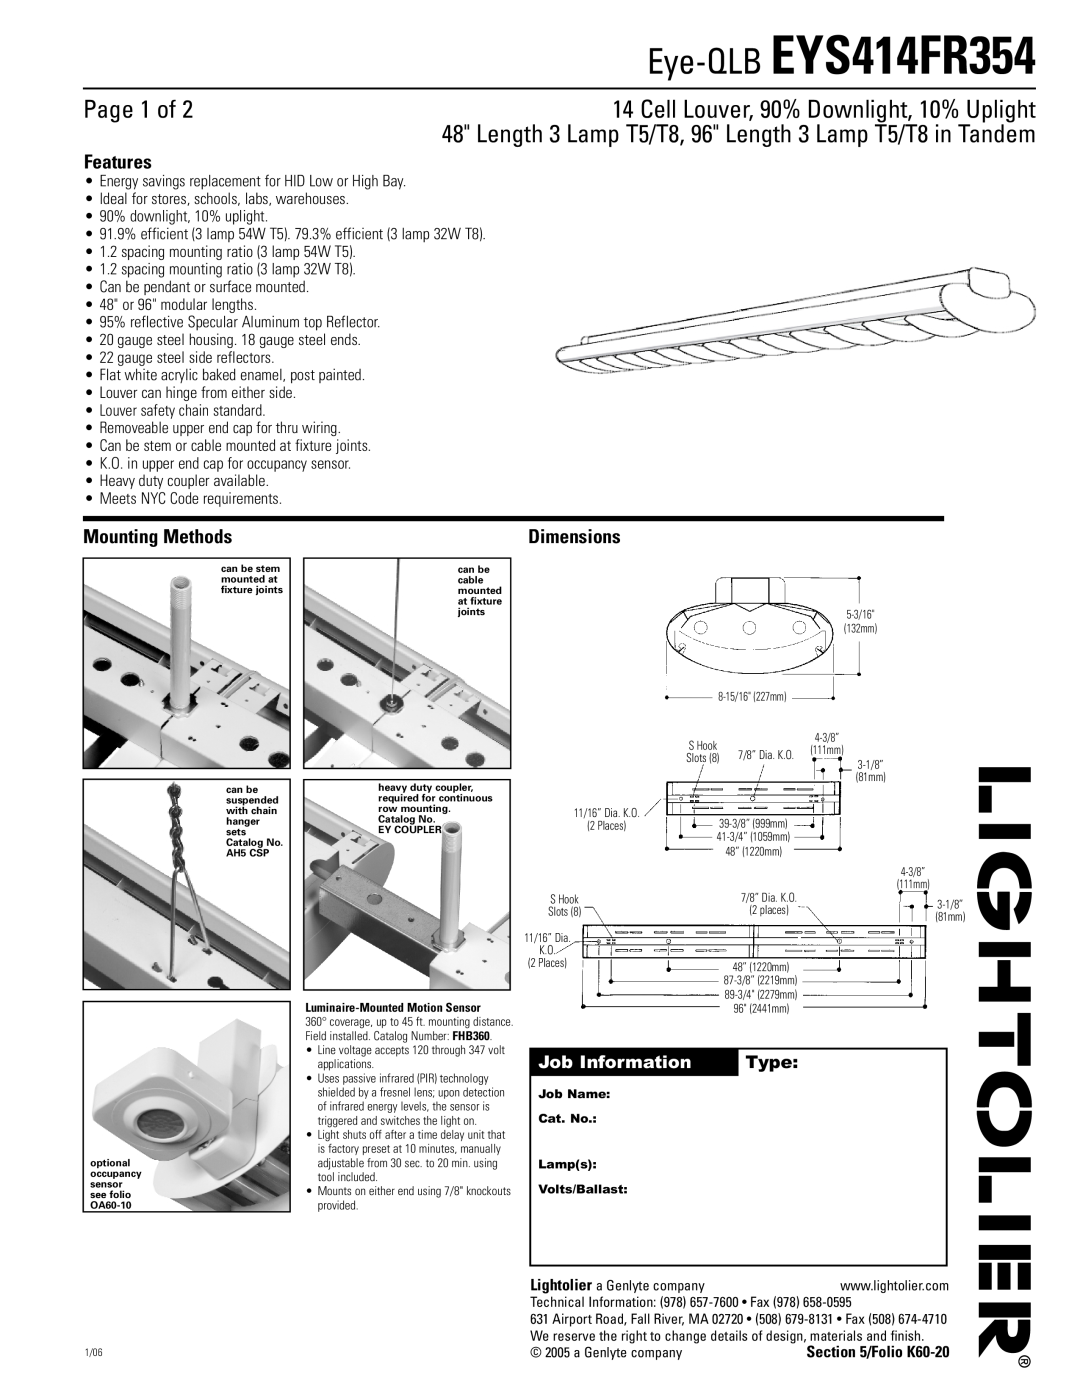 Lightolier dimensions Eye-QLB EYS414FR354, Page 1 of, Cell Louver, 90% Downlight, 10% Uplight, Features, Dimensions 